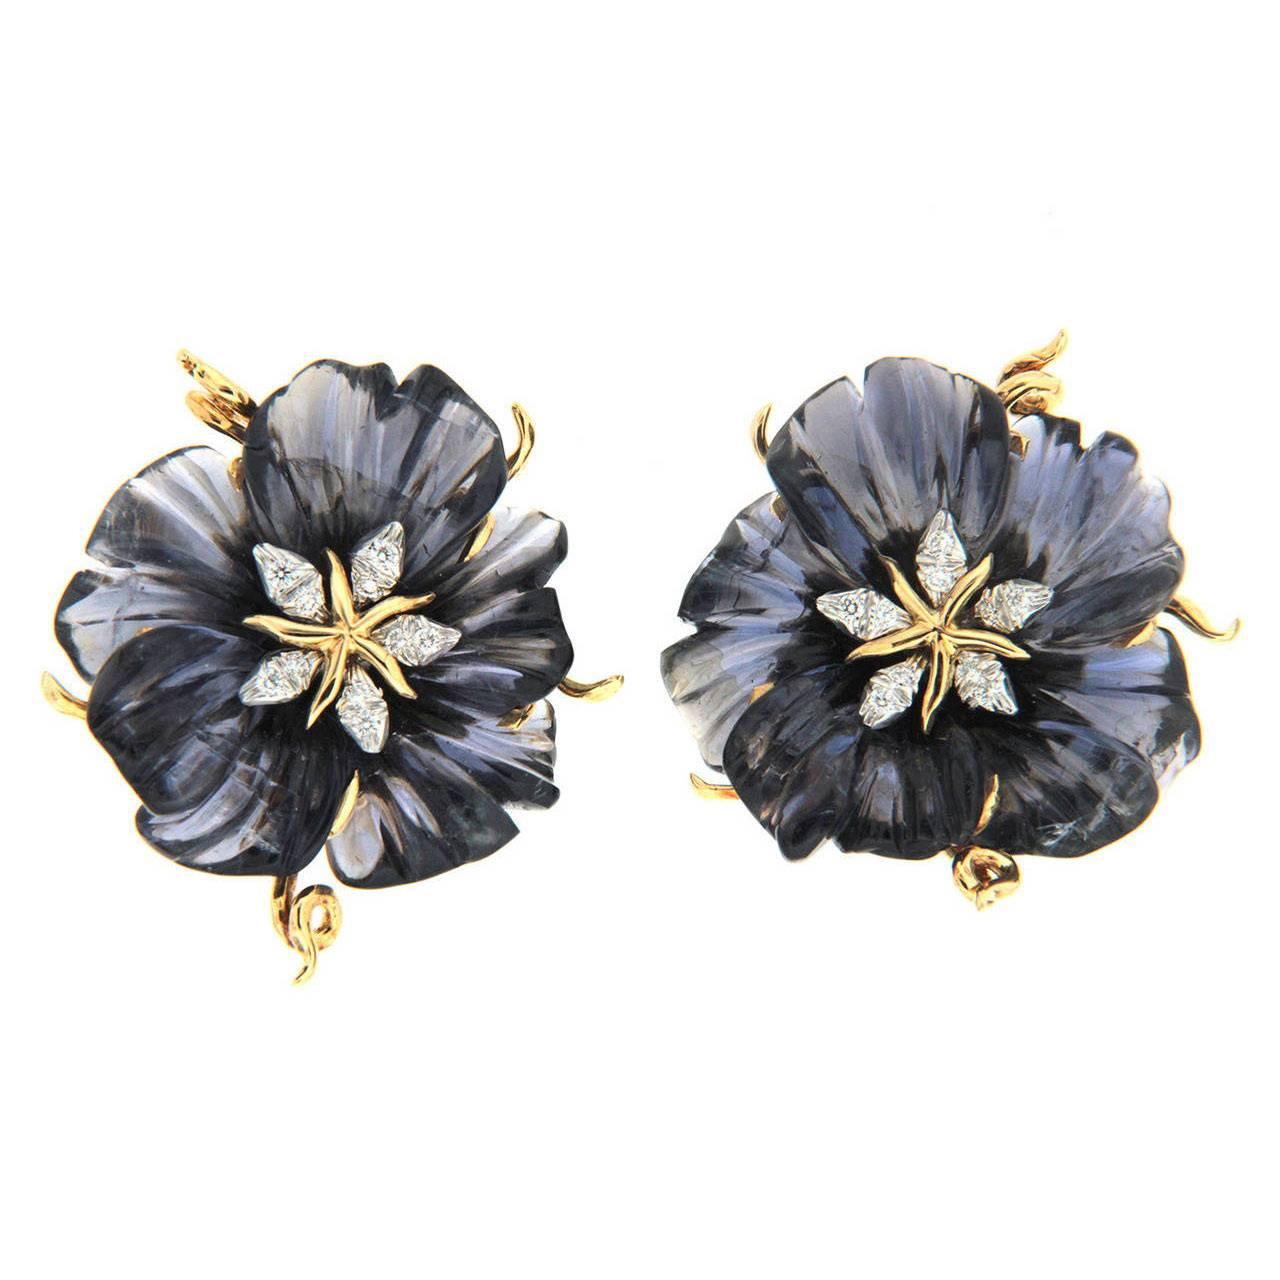 Carved Iolite Flower Earrings with Diamonds